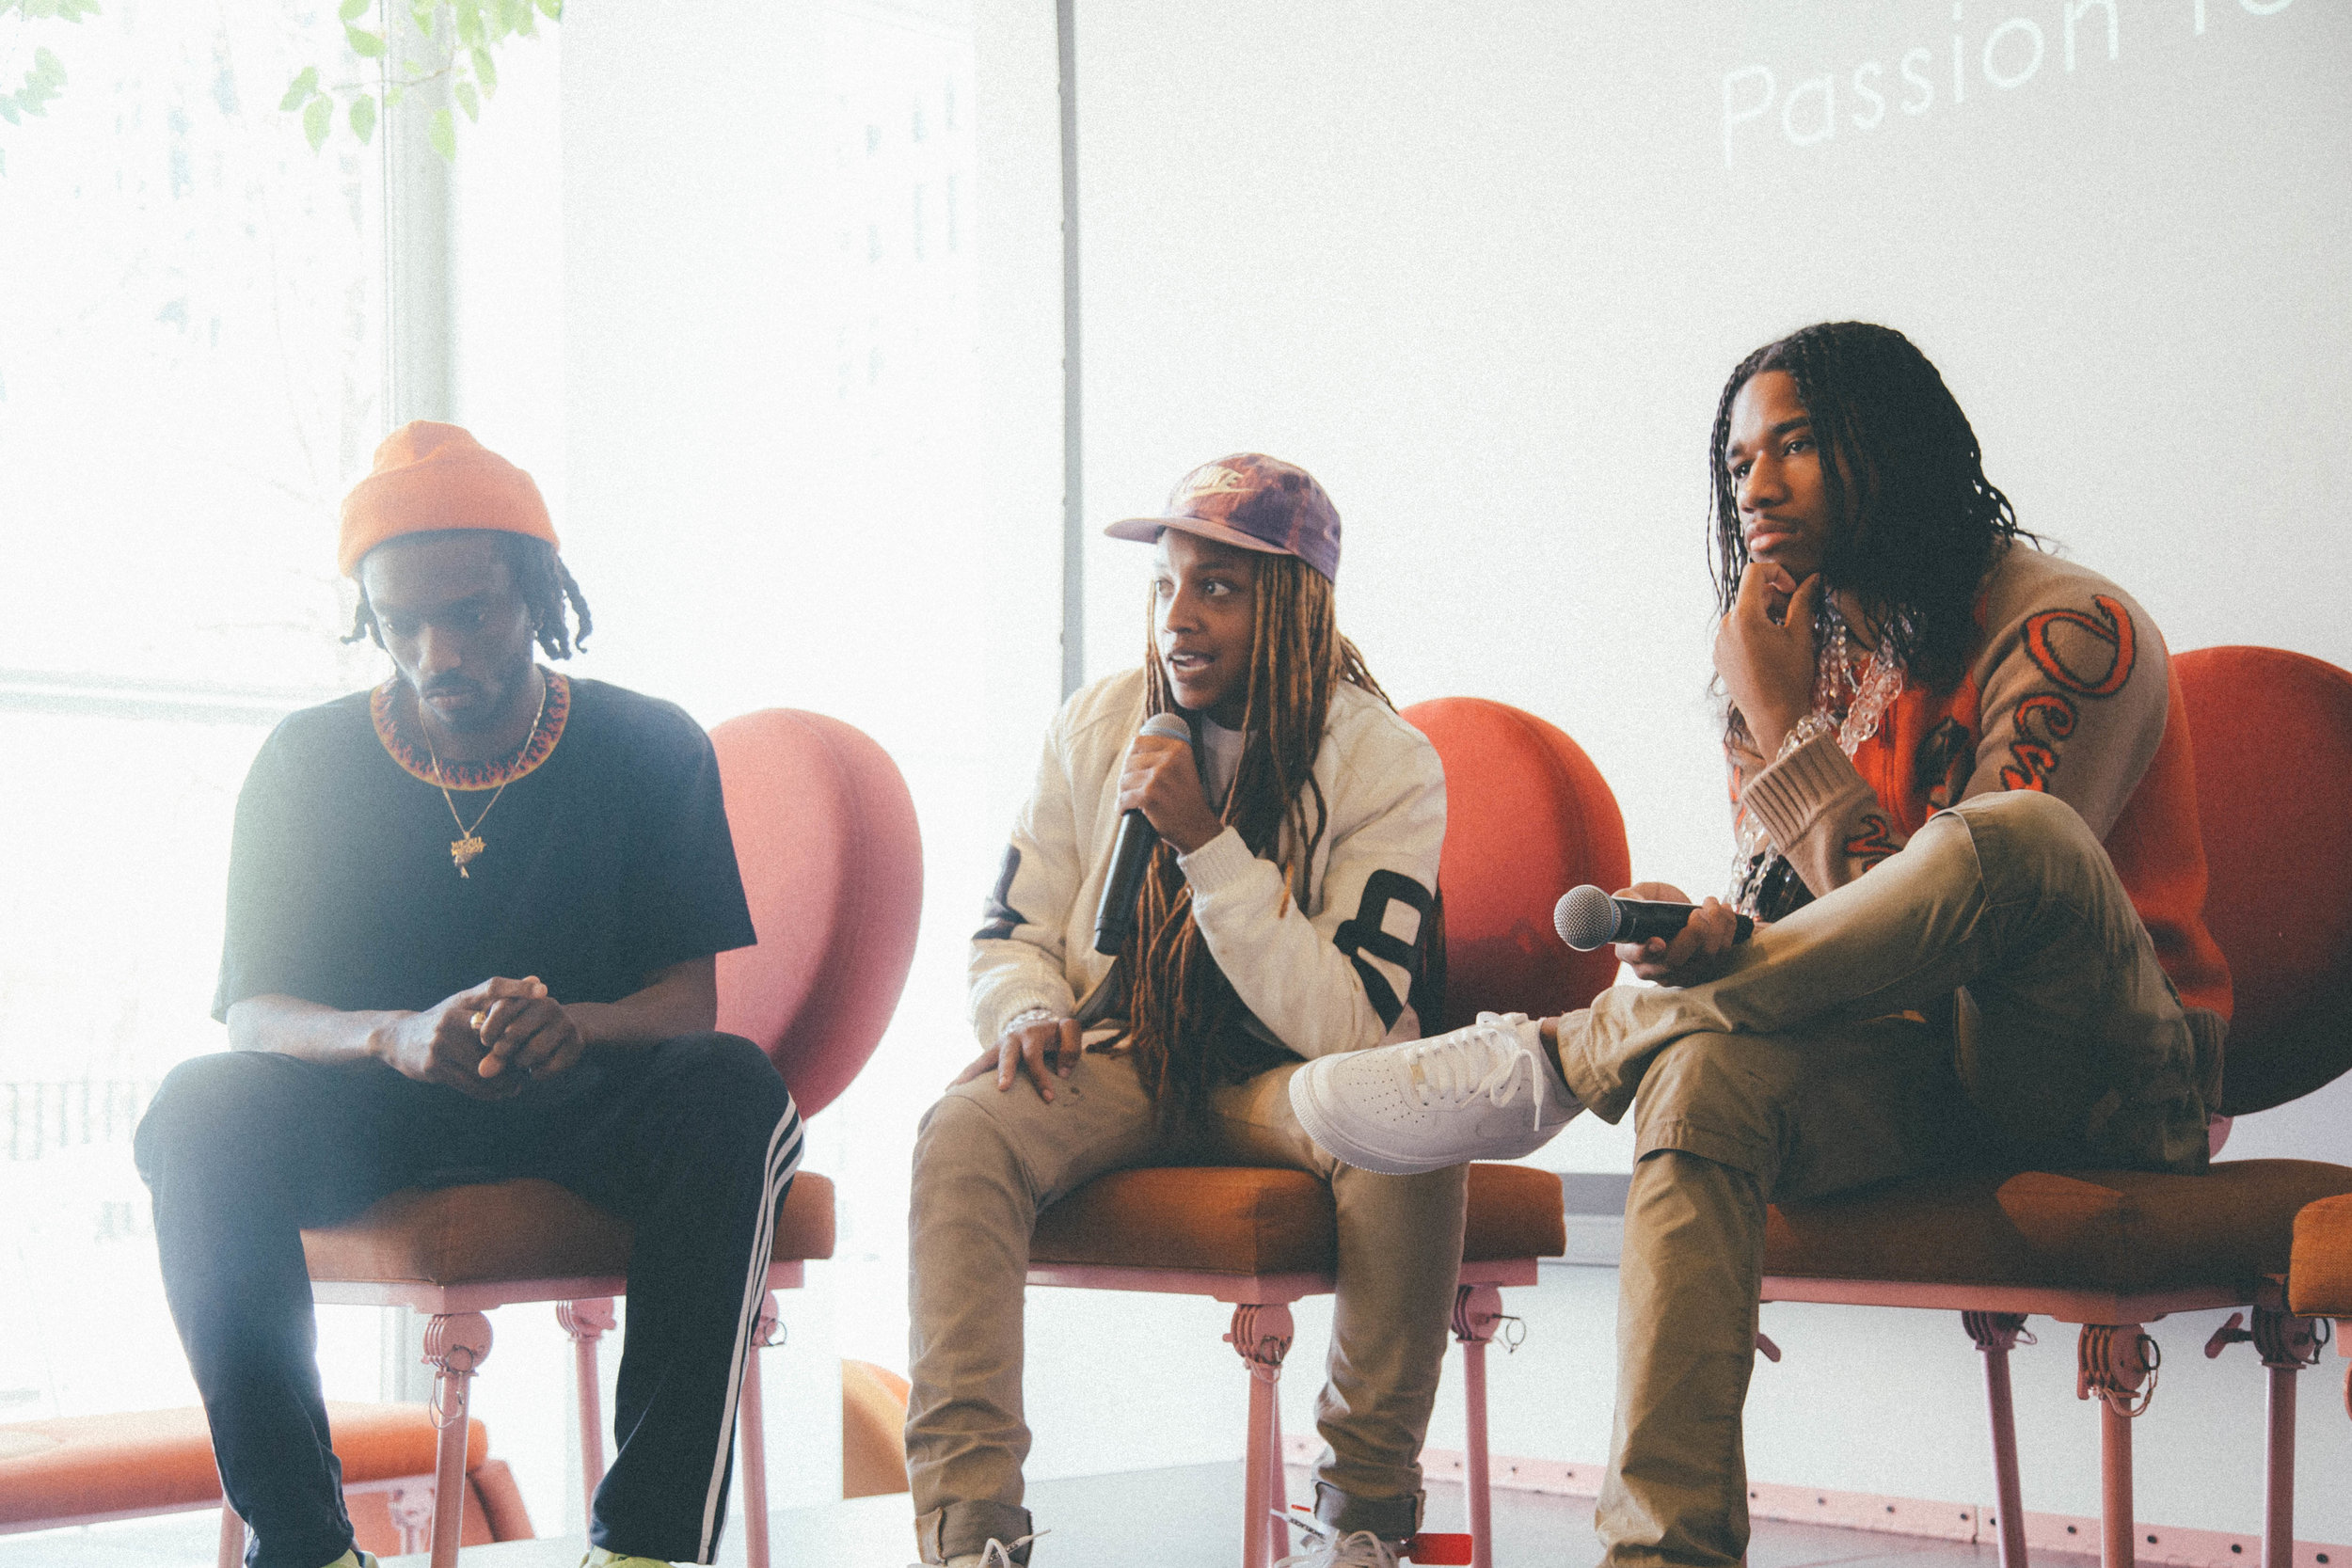  Left to Right: Guest speakers Des Money, Sheila Rashid, and Kristopher Kites participating in an open panel discussion during Passion to Profession: Best Dressed at the Museum of Contemporary Art Chicago. 2019.  photo by: Africanist 